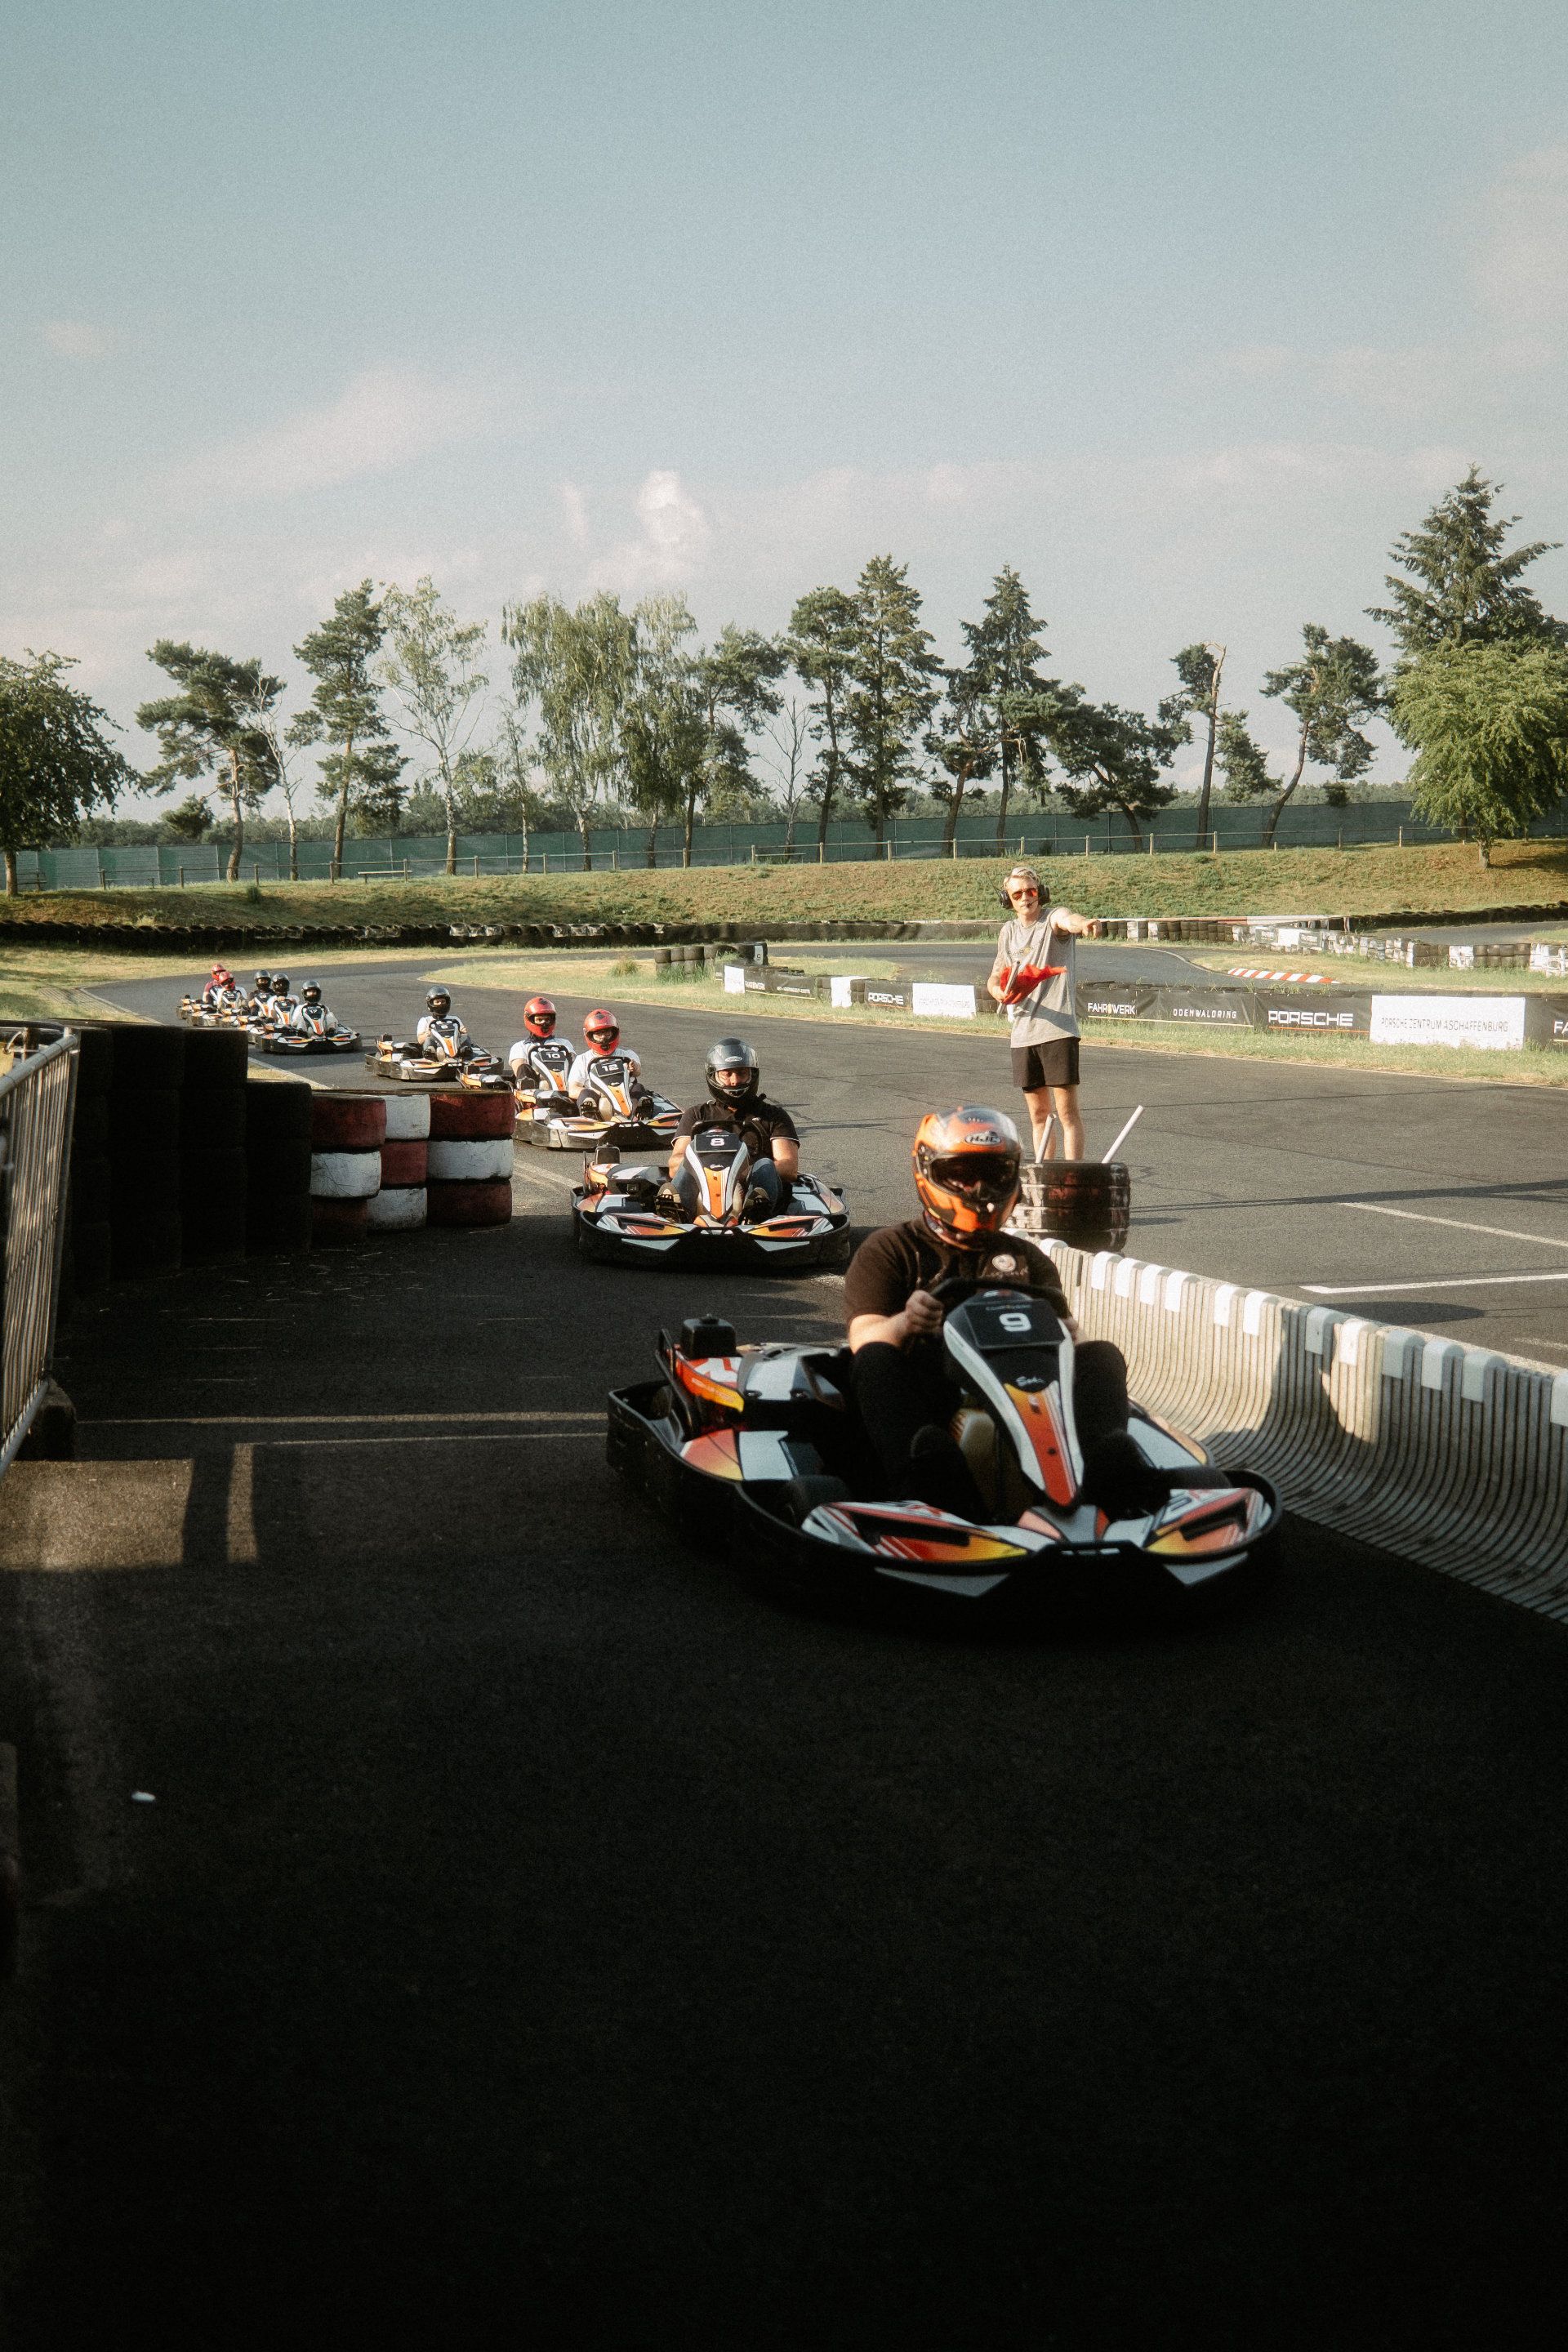 A group of go-kart racers lined up at the starting line, ready to accelerate into an exciting race on a sunny day, as a photographer from Aschaffenburg watches on.